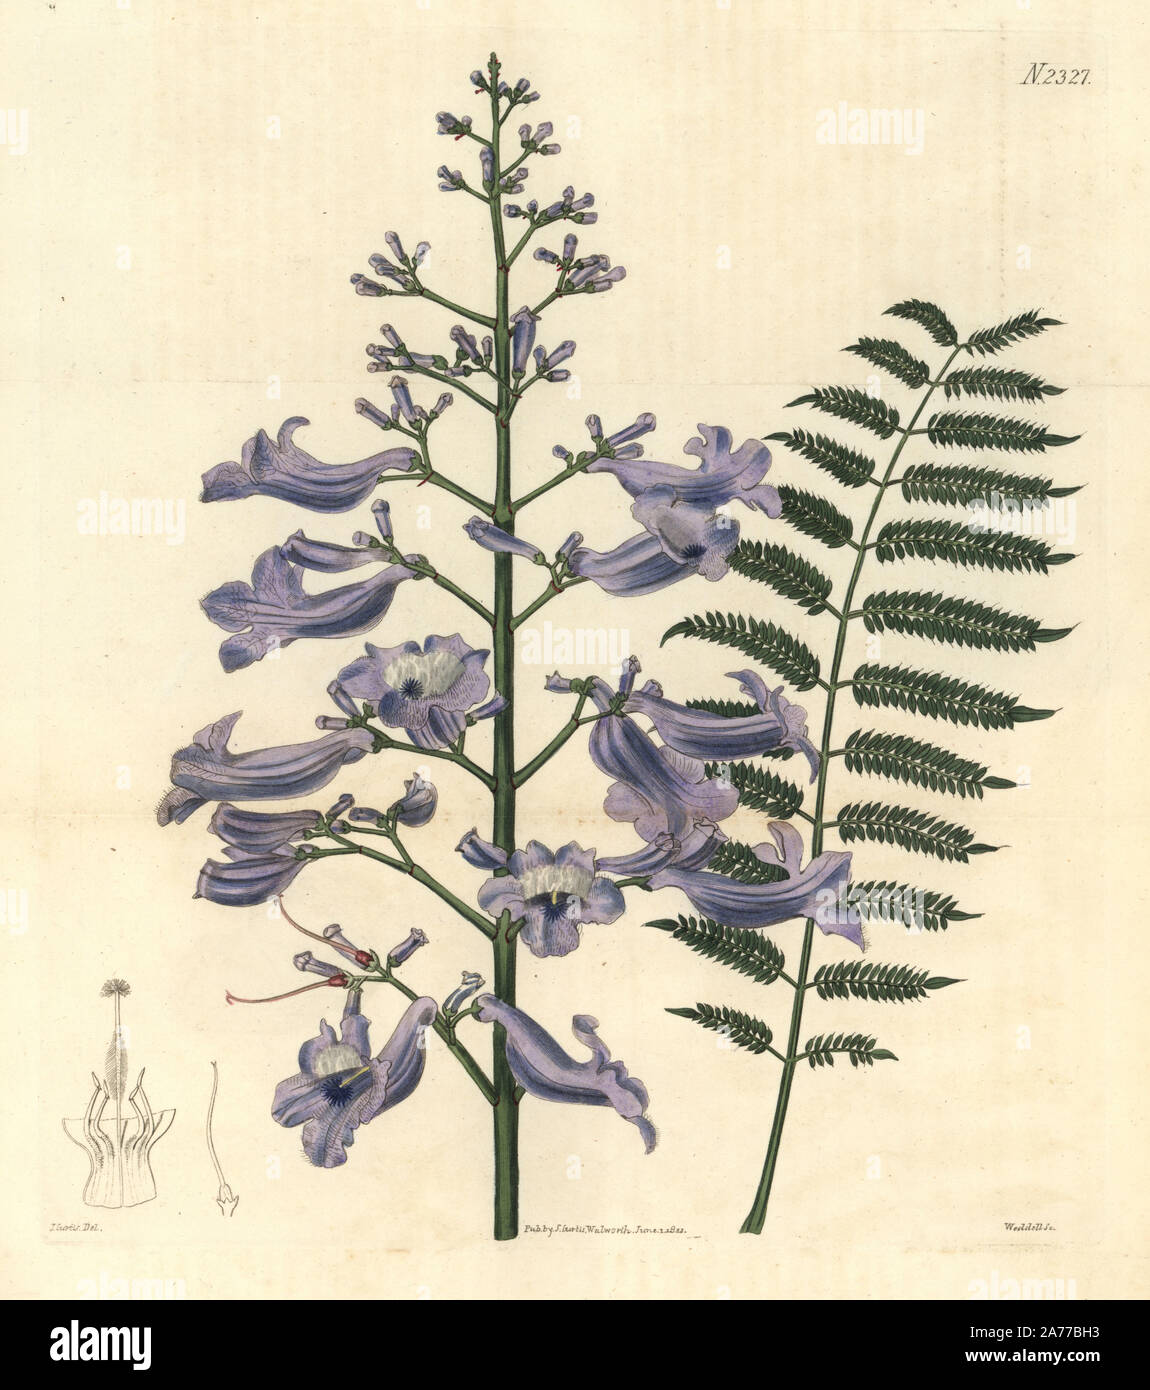 Trinidad fern tree, Jacaranda mimosifolia (Oval leaved jacaranda, Jacaranda ovalifolia). Handcoloured copperplate engraving by Weddell after an illustration by John Curtis from Samuel Curtis's 'Botanical Magazine,' London, 1822. Stock Photo